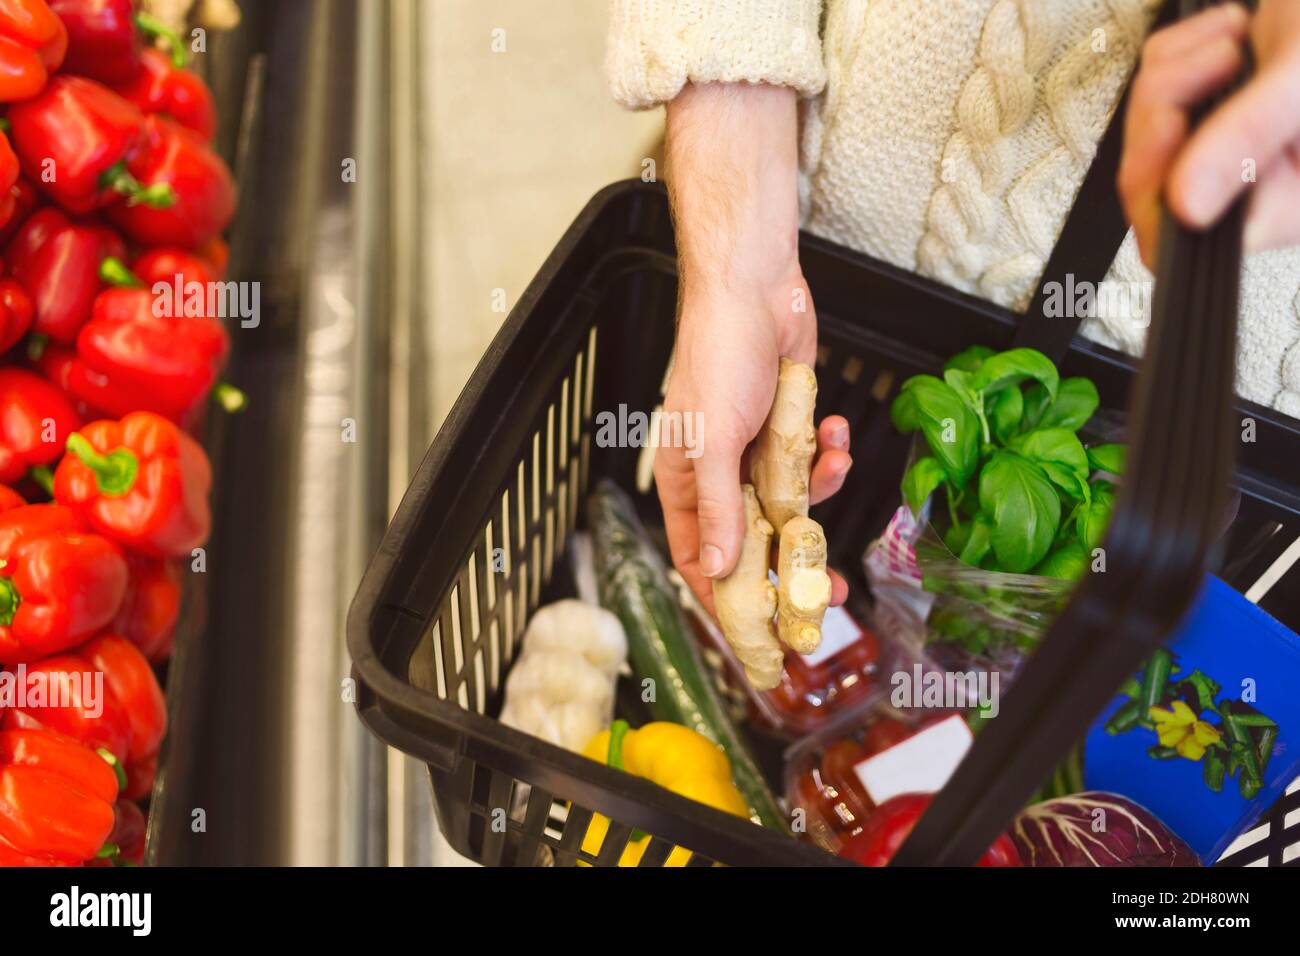 Midsection of man buying groceries at supermarket Stock Photo